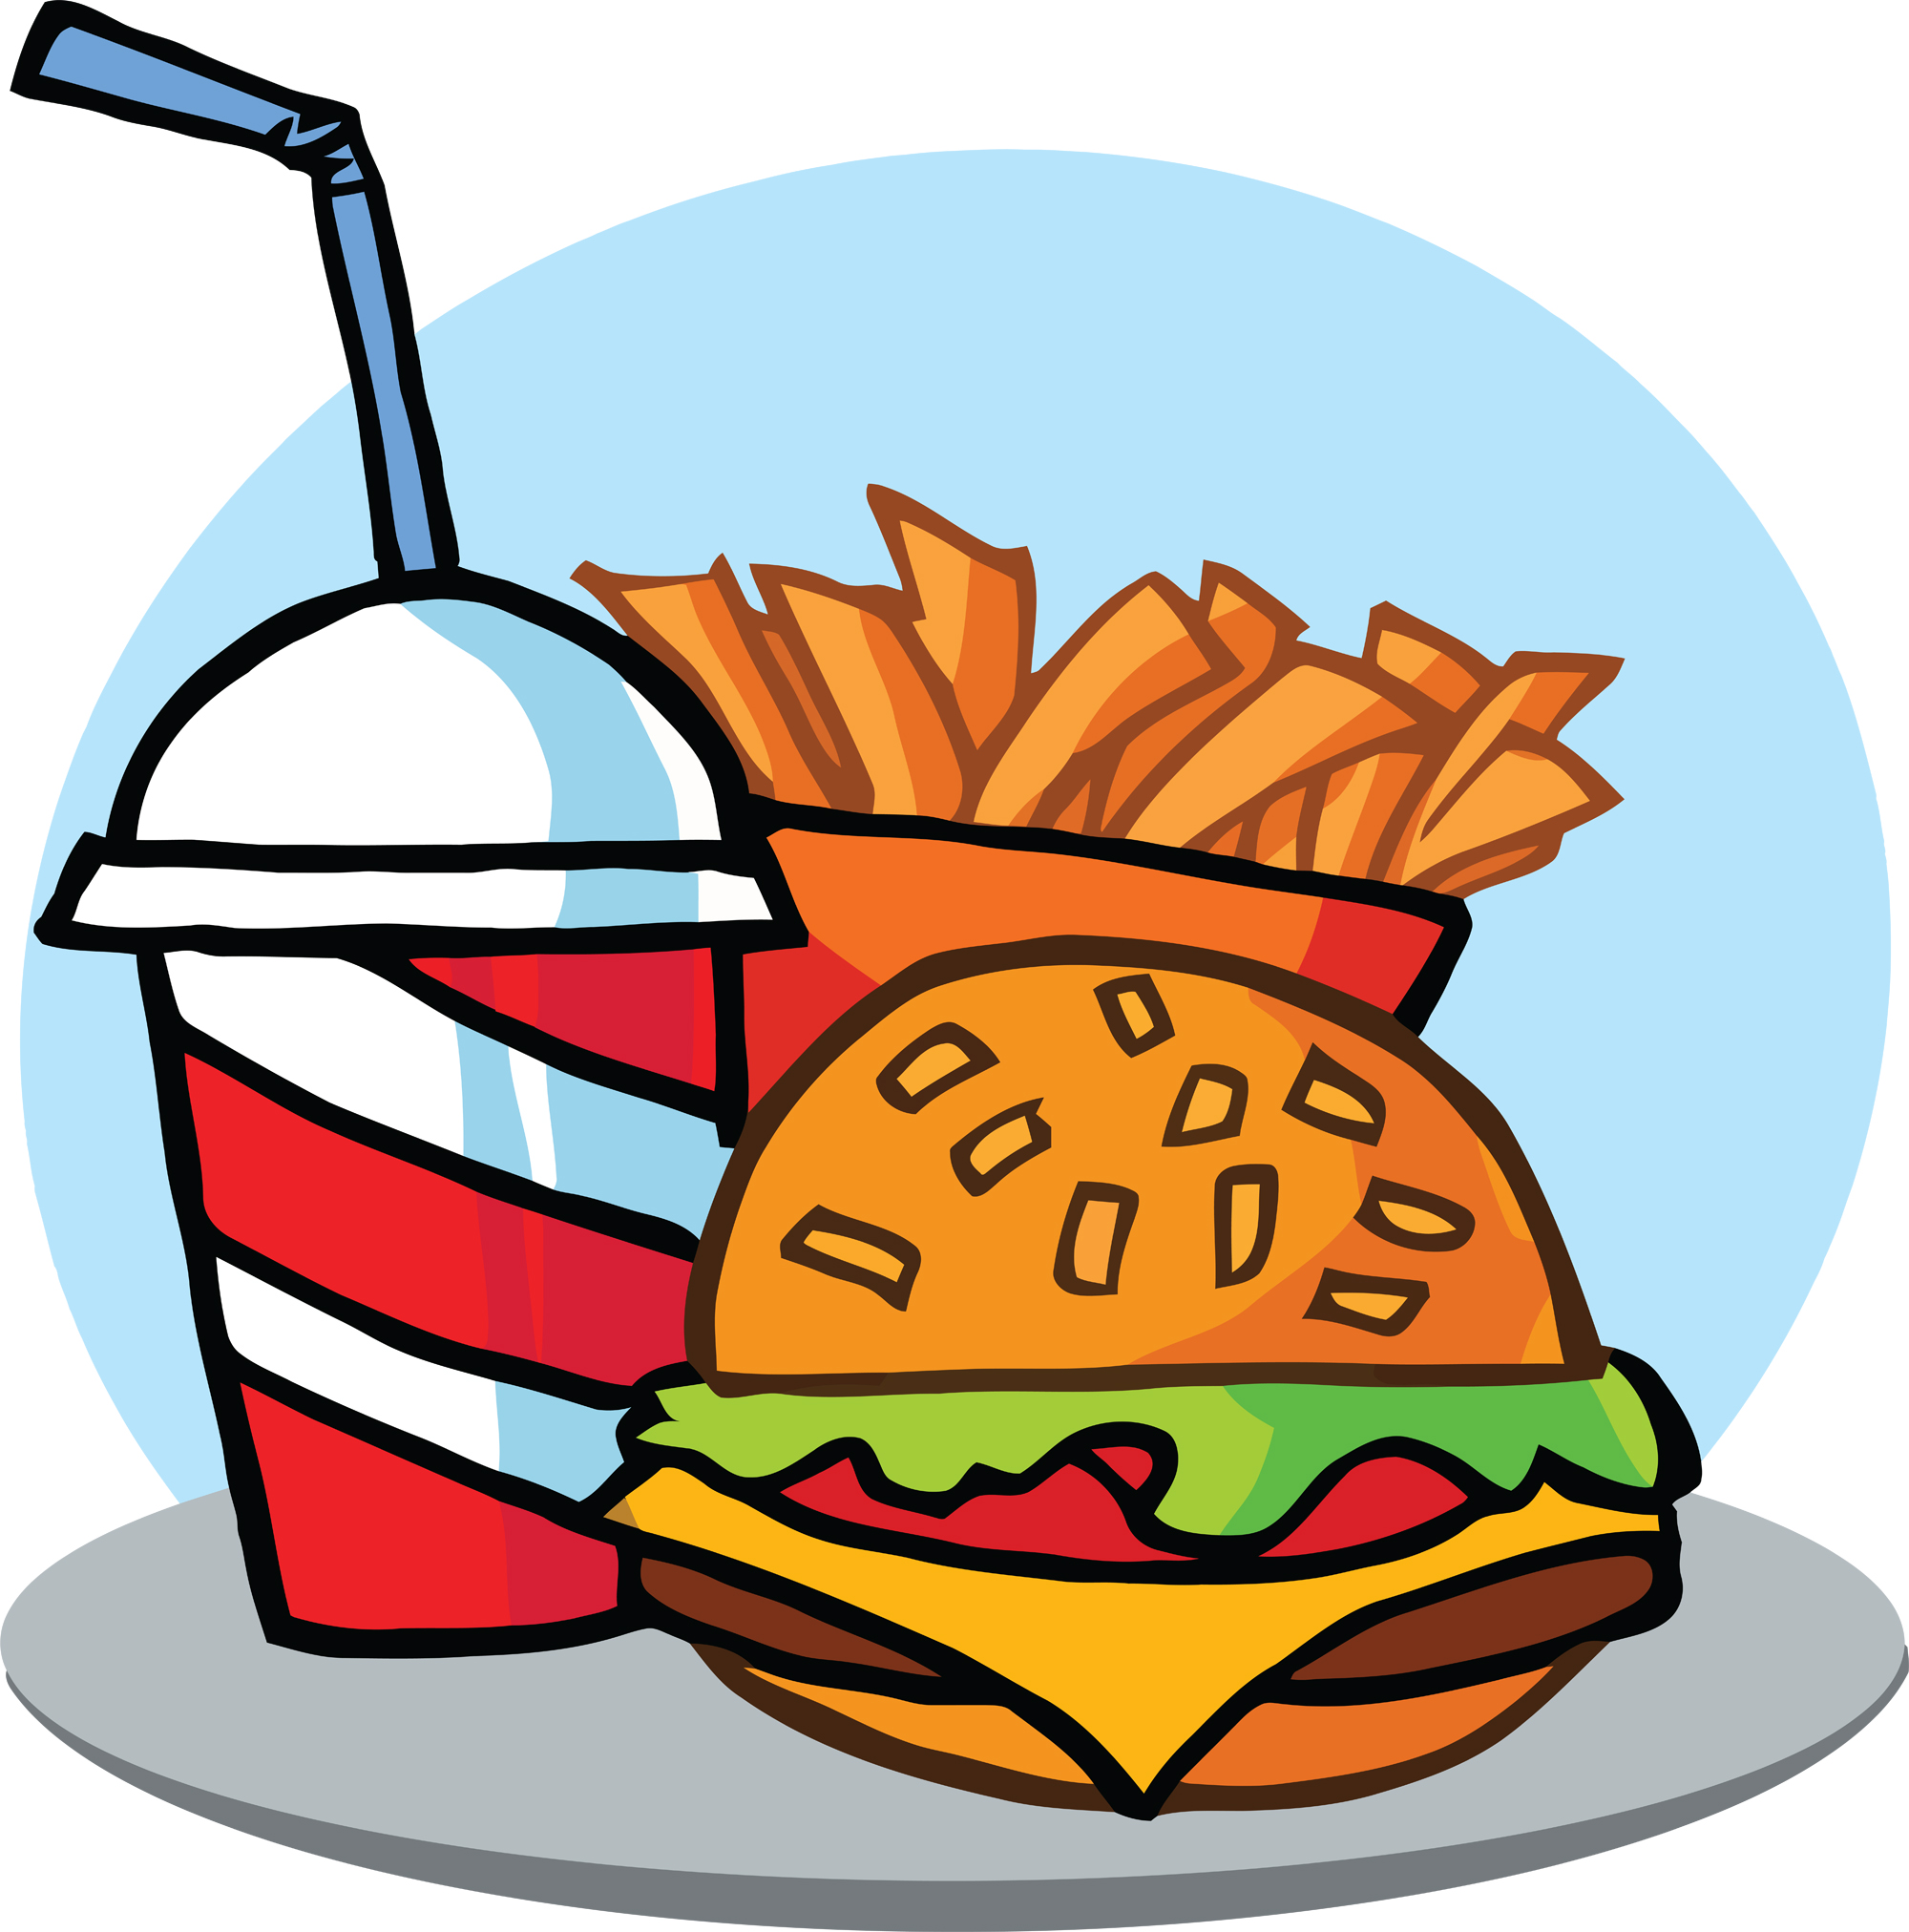 Fast Food is Bad for You. Or is it? | SiOWfa15: Science in ...